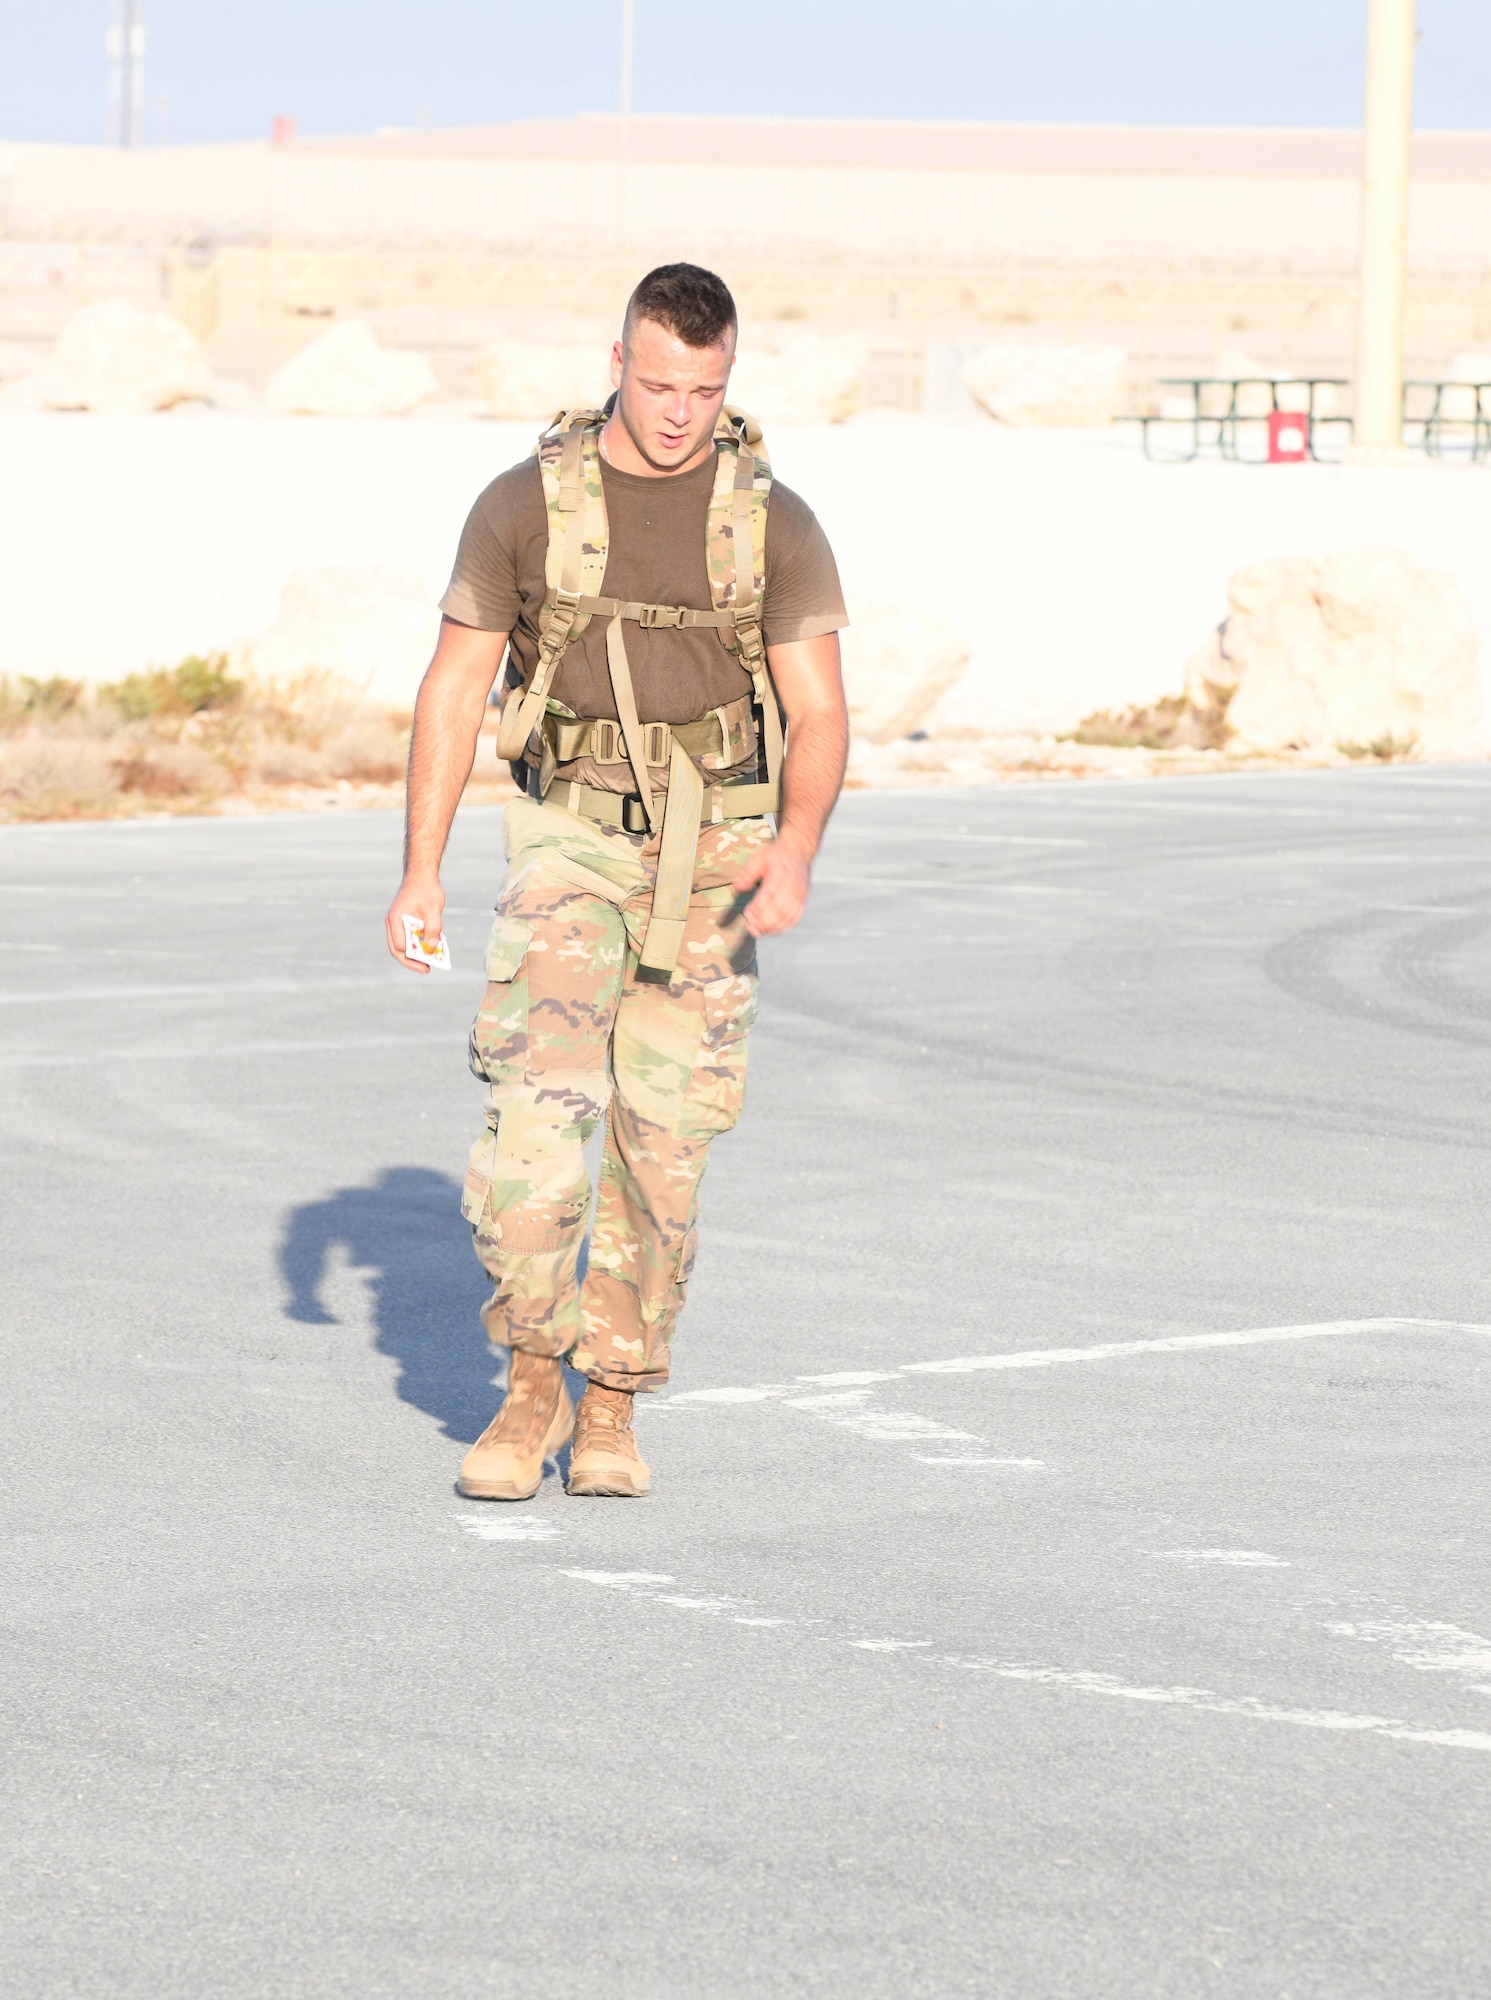 U.S. Army Private 1st Class Isaac Vieau, an ammunition supply specialist, 395th Ordnance Company, deployed to Al Udeid Air Base, Qatar, participates in the traditional 30-kilometer (18.6-mile) Norwegian foot march event Dec. 5, 2020. The tradition began in 1915, 10 years after Norway gained its independence from Sweden and has become a rite of passage for all Norwegian military members. Vieau was one of nearly 120 coalition members, including Americans, Australians, New Zealanders, British and Canadians who participated in the march under the supervision of Norwegian armed forces Capt. Magne Rambo, deployed to Al Udeid AB as part of the U.S. Central Command Partner Integration Enterprise. (U.S. Air Force photo by Staff Sgt. Kayla White)